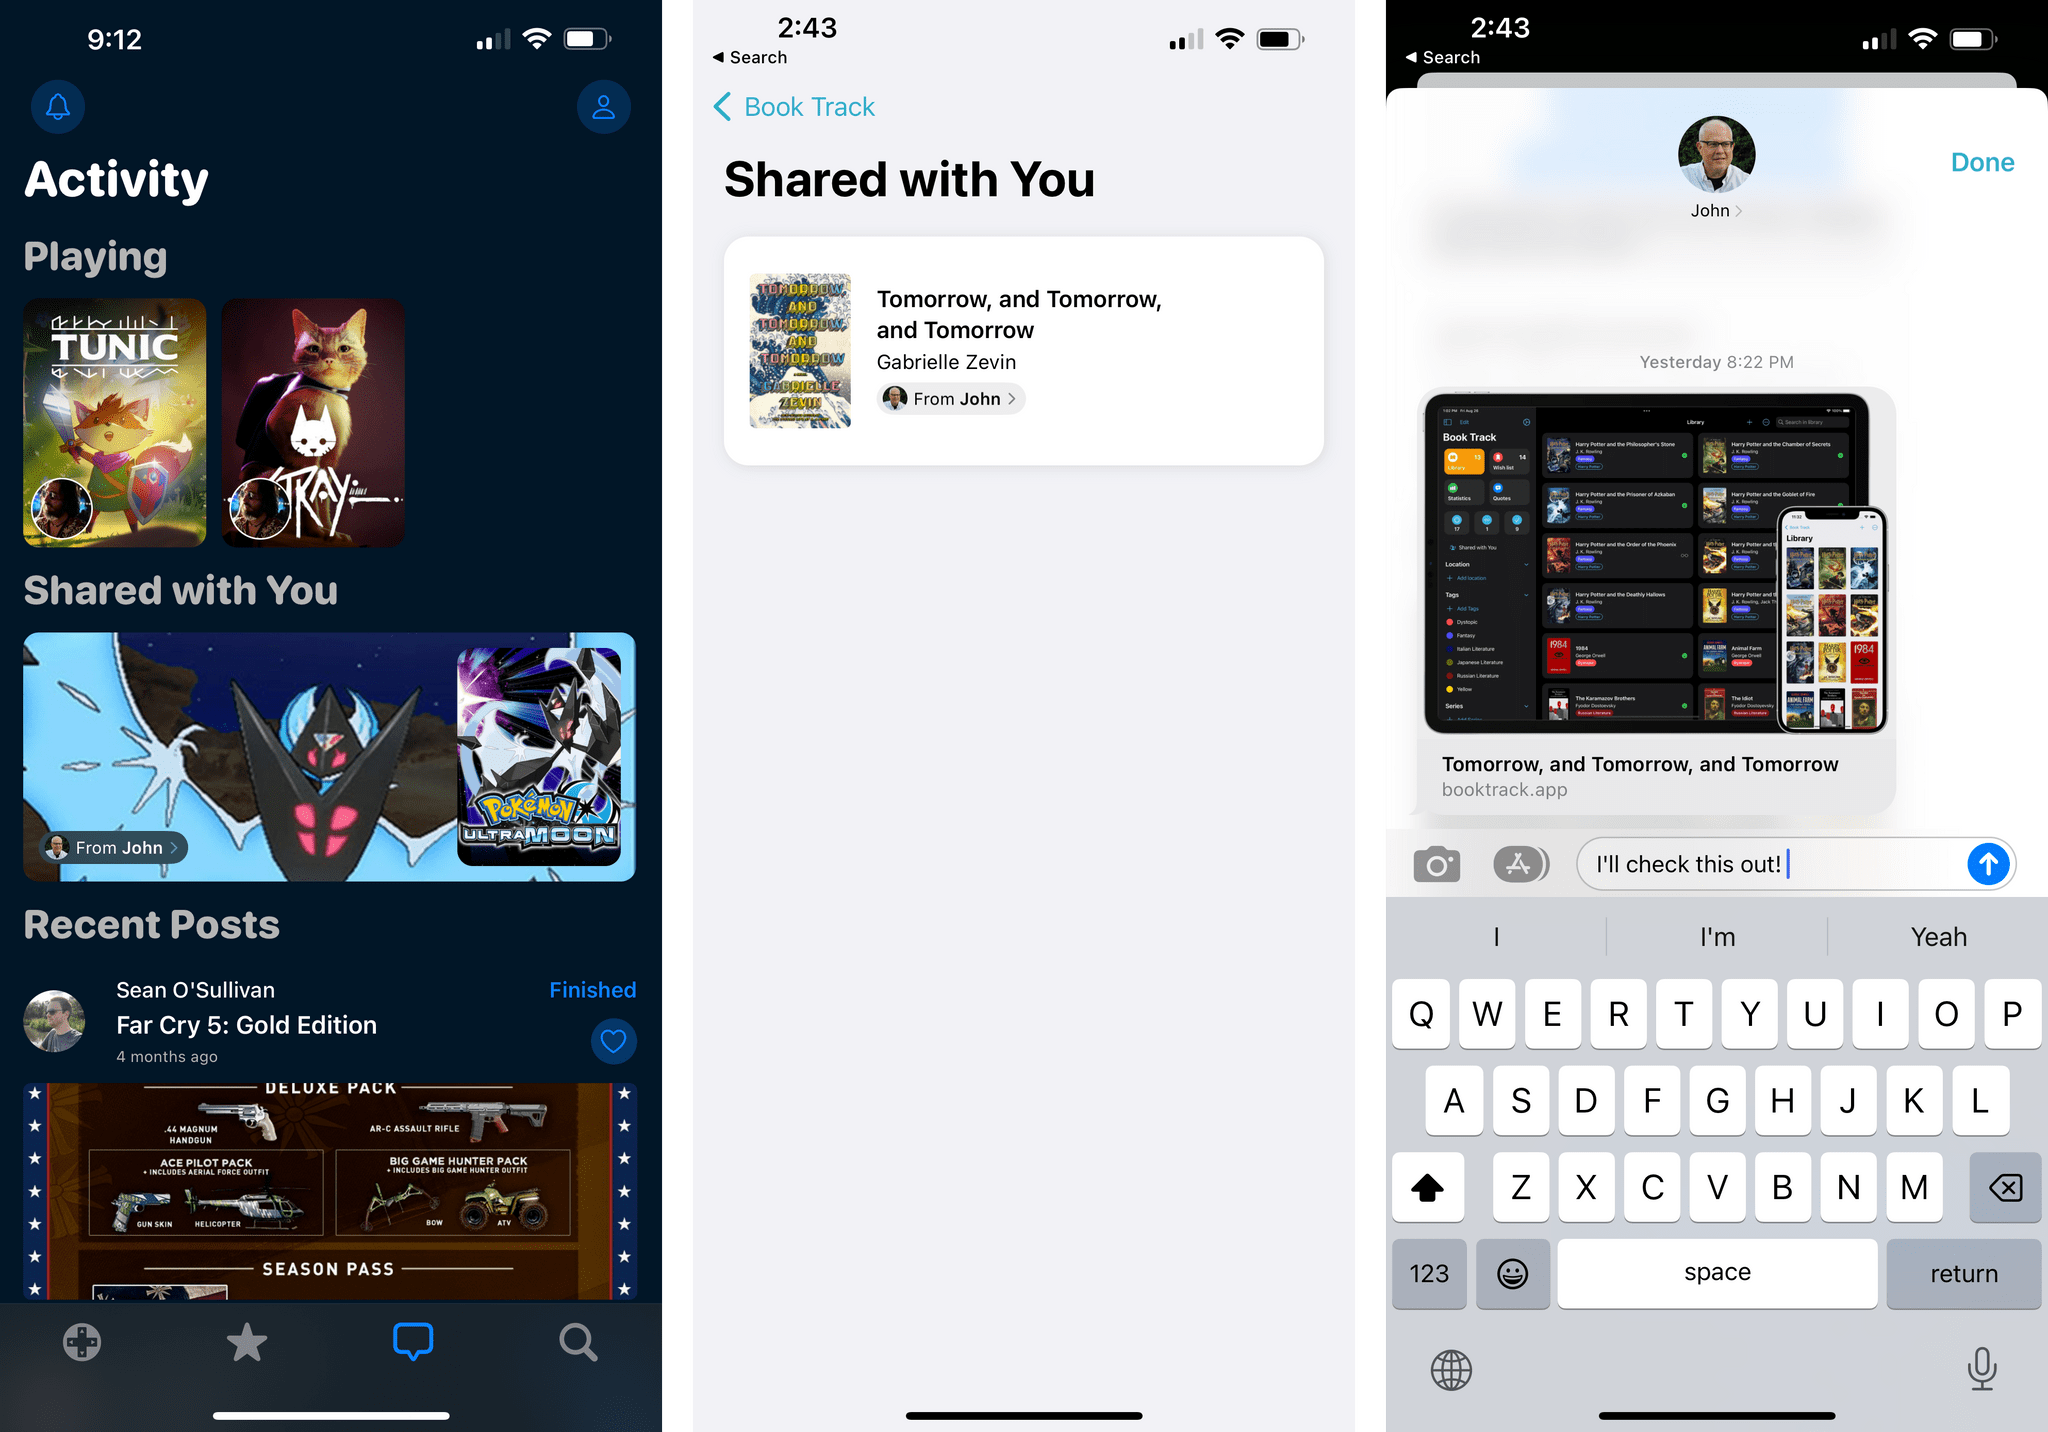 Shared with You shelves in GameTrack (left) and Book Track. When you reply to an item in Shared with You (right) the message will be a direct reply to the original one.